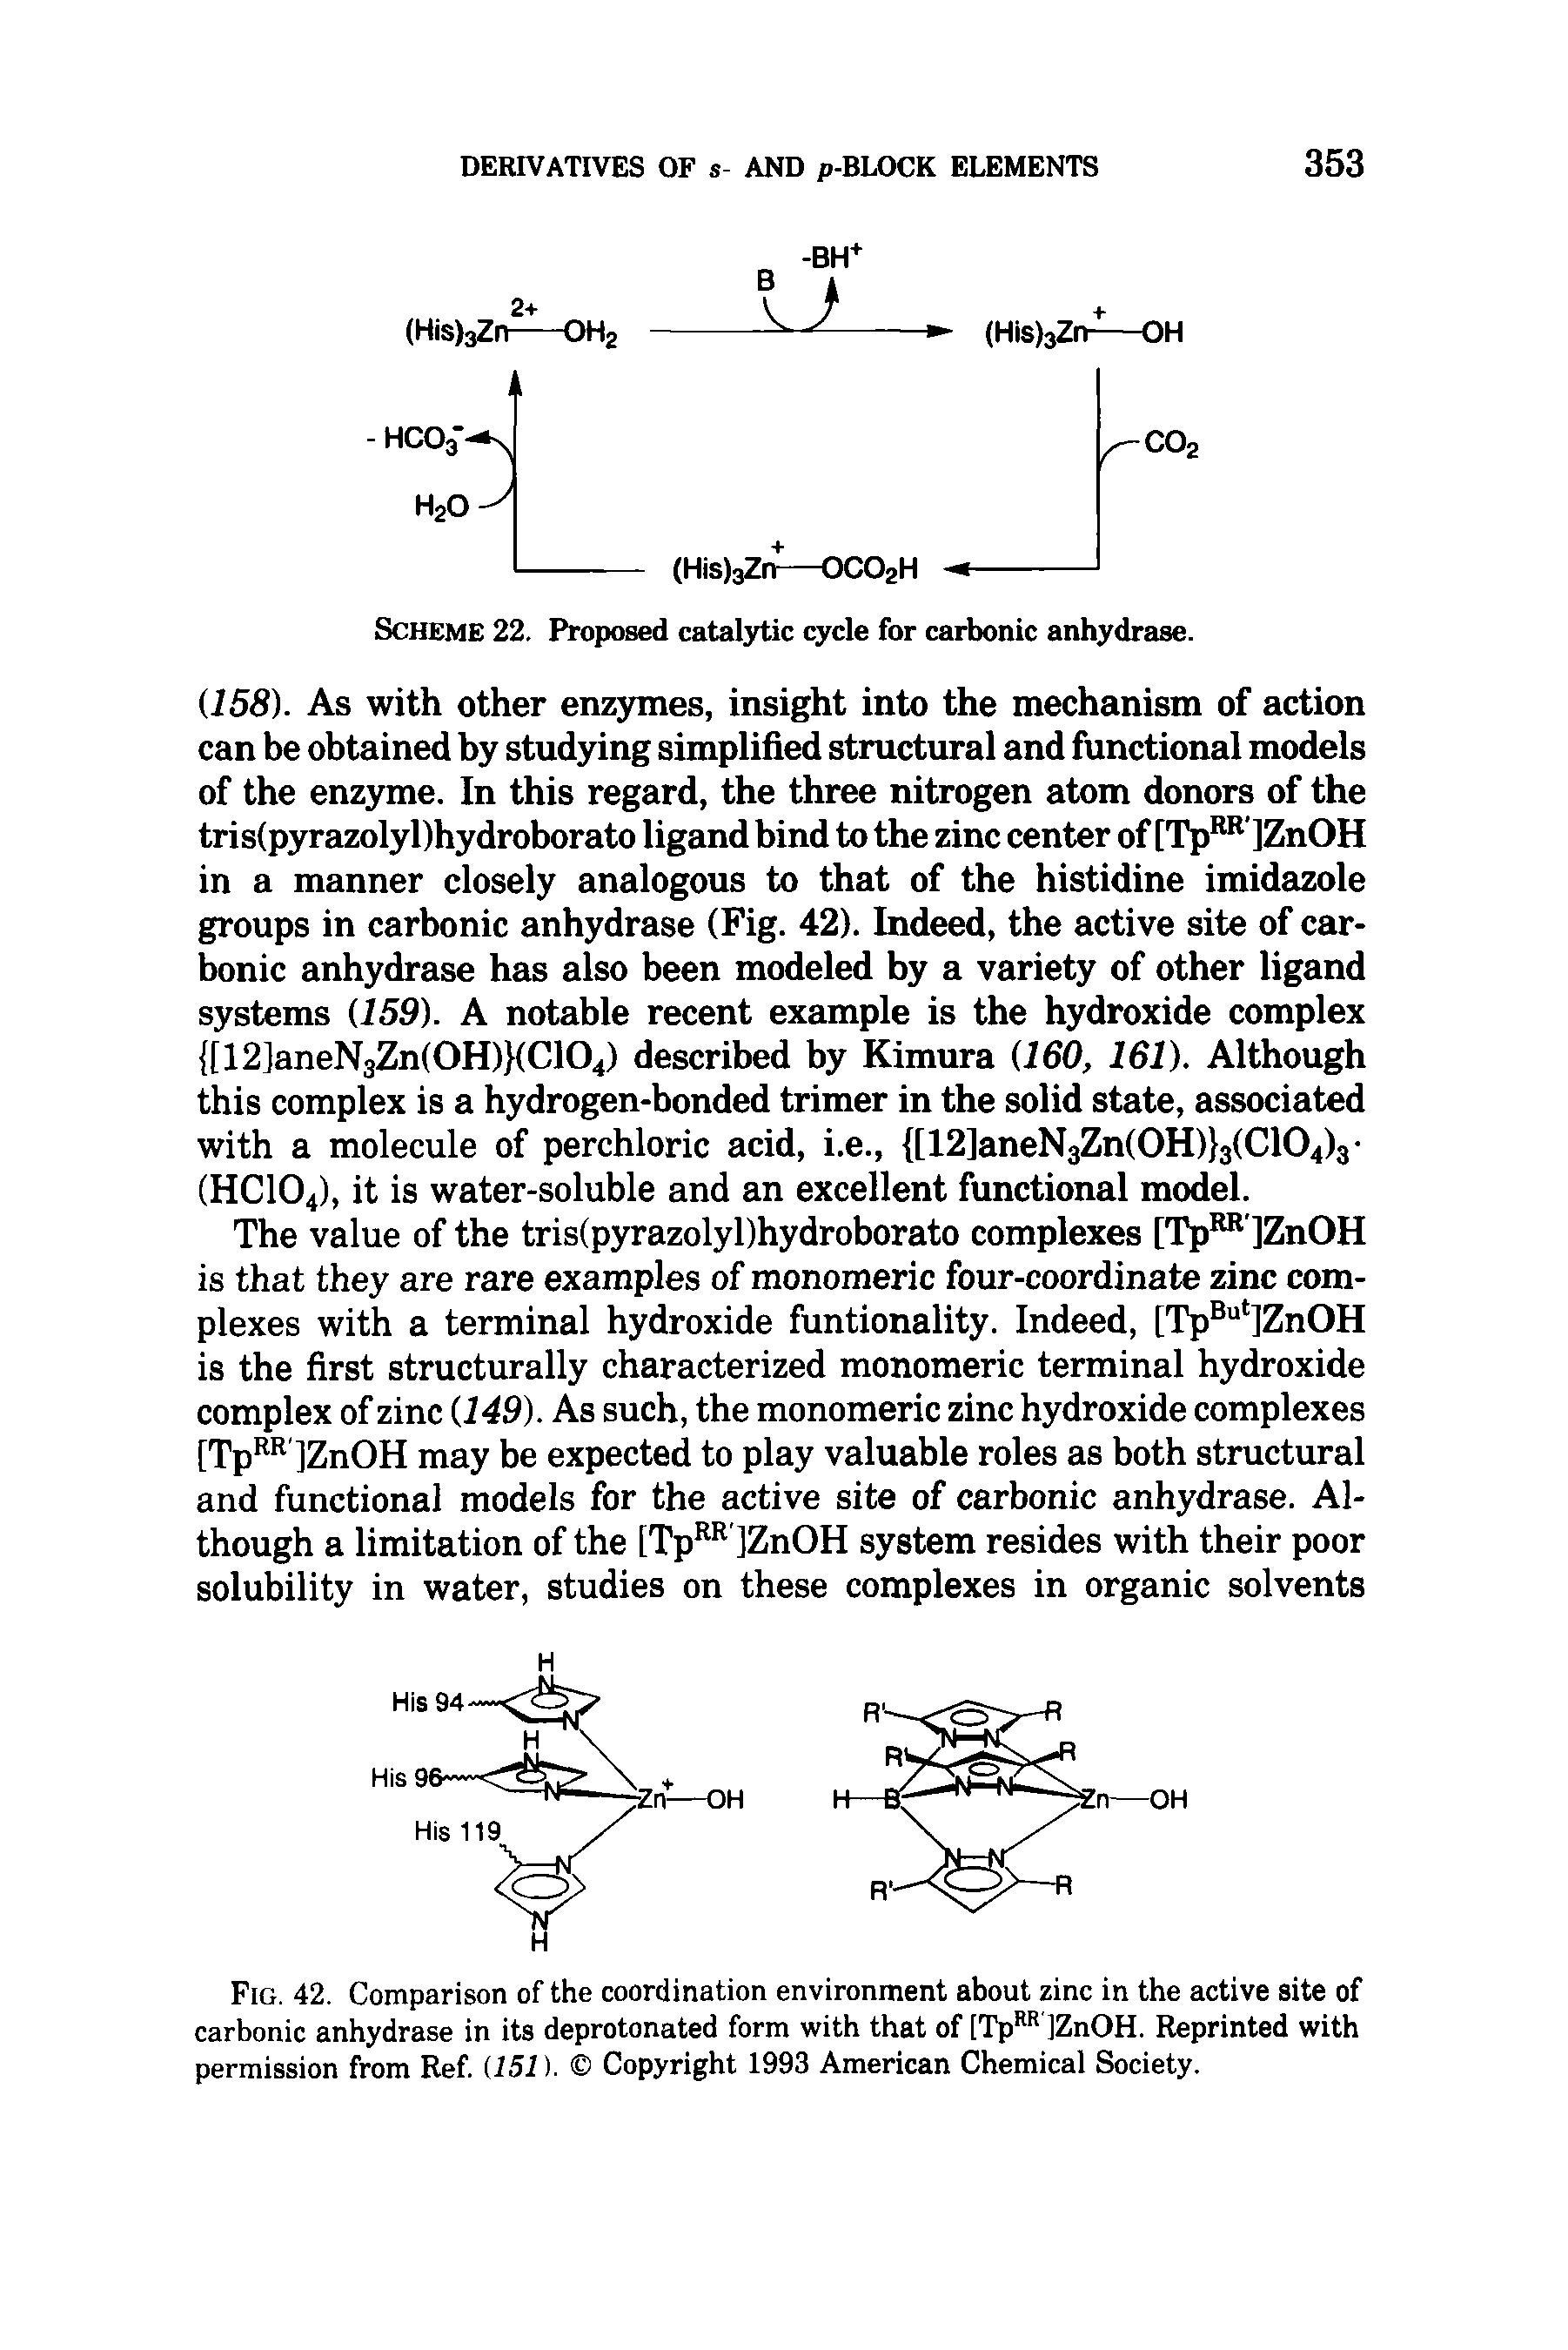 Fig. 42. Comparison of the coordination environment about zinc in the active site of carbonic anhydrase in its deprotonated form with that of [TpRR ]ZnOH. Reprinted with permission from Ref. (151). Copyright 1993 American Chemical Society.